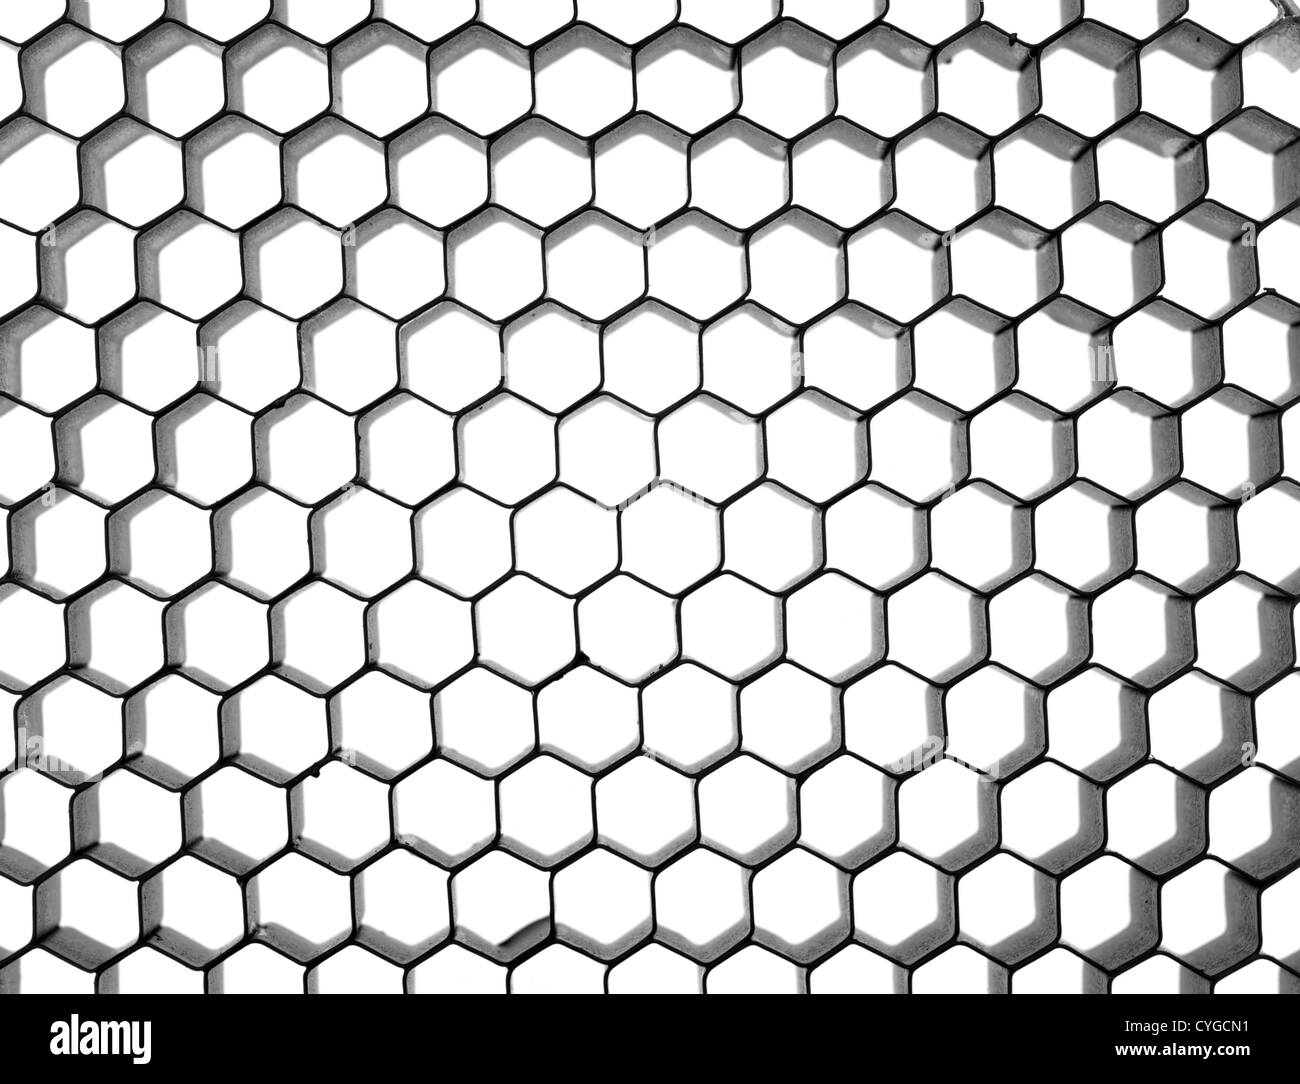 A honeycomb background image over a white background Stock Photo